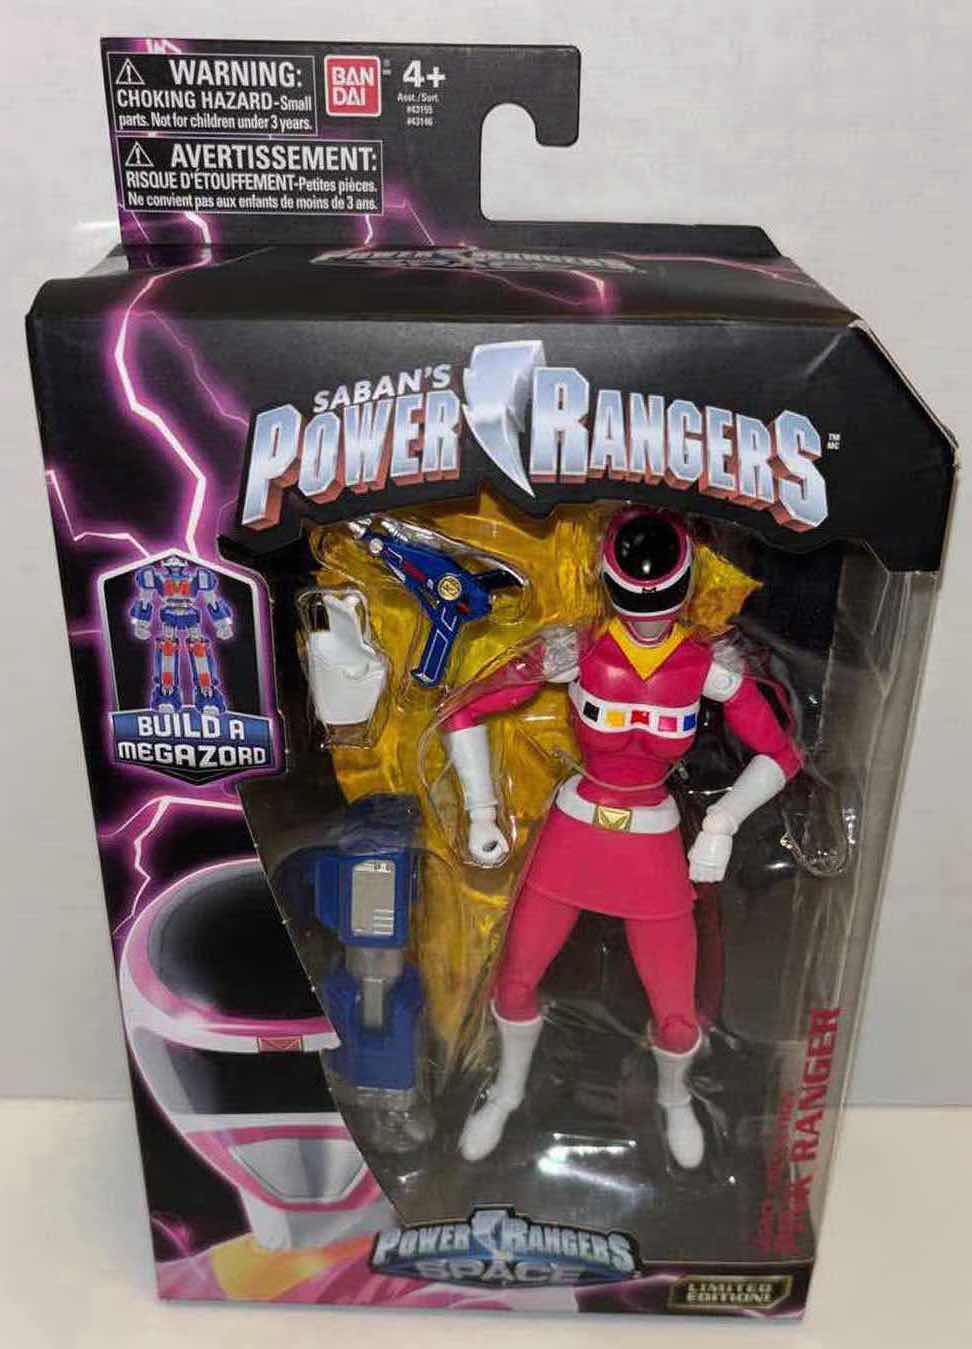 Photo 6 of NEW BANDAI SABAN’S POWER RANGERS ACTION FIGURES & ACCESSORIES 5-PACK, POWER RANGERS IN SPACE LIMITED EDITION LEGACY COLLECTION “RED RANGER, BLACK RANGER, YELLOW RANGER, BLUE RANGER & PINK RANGER”